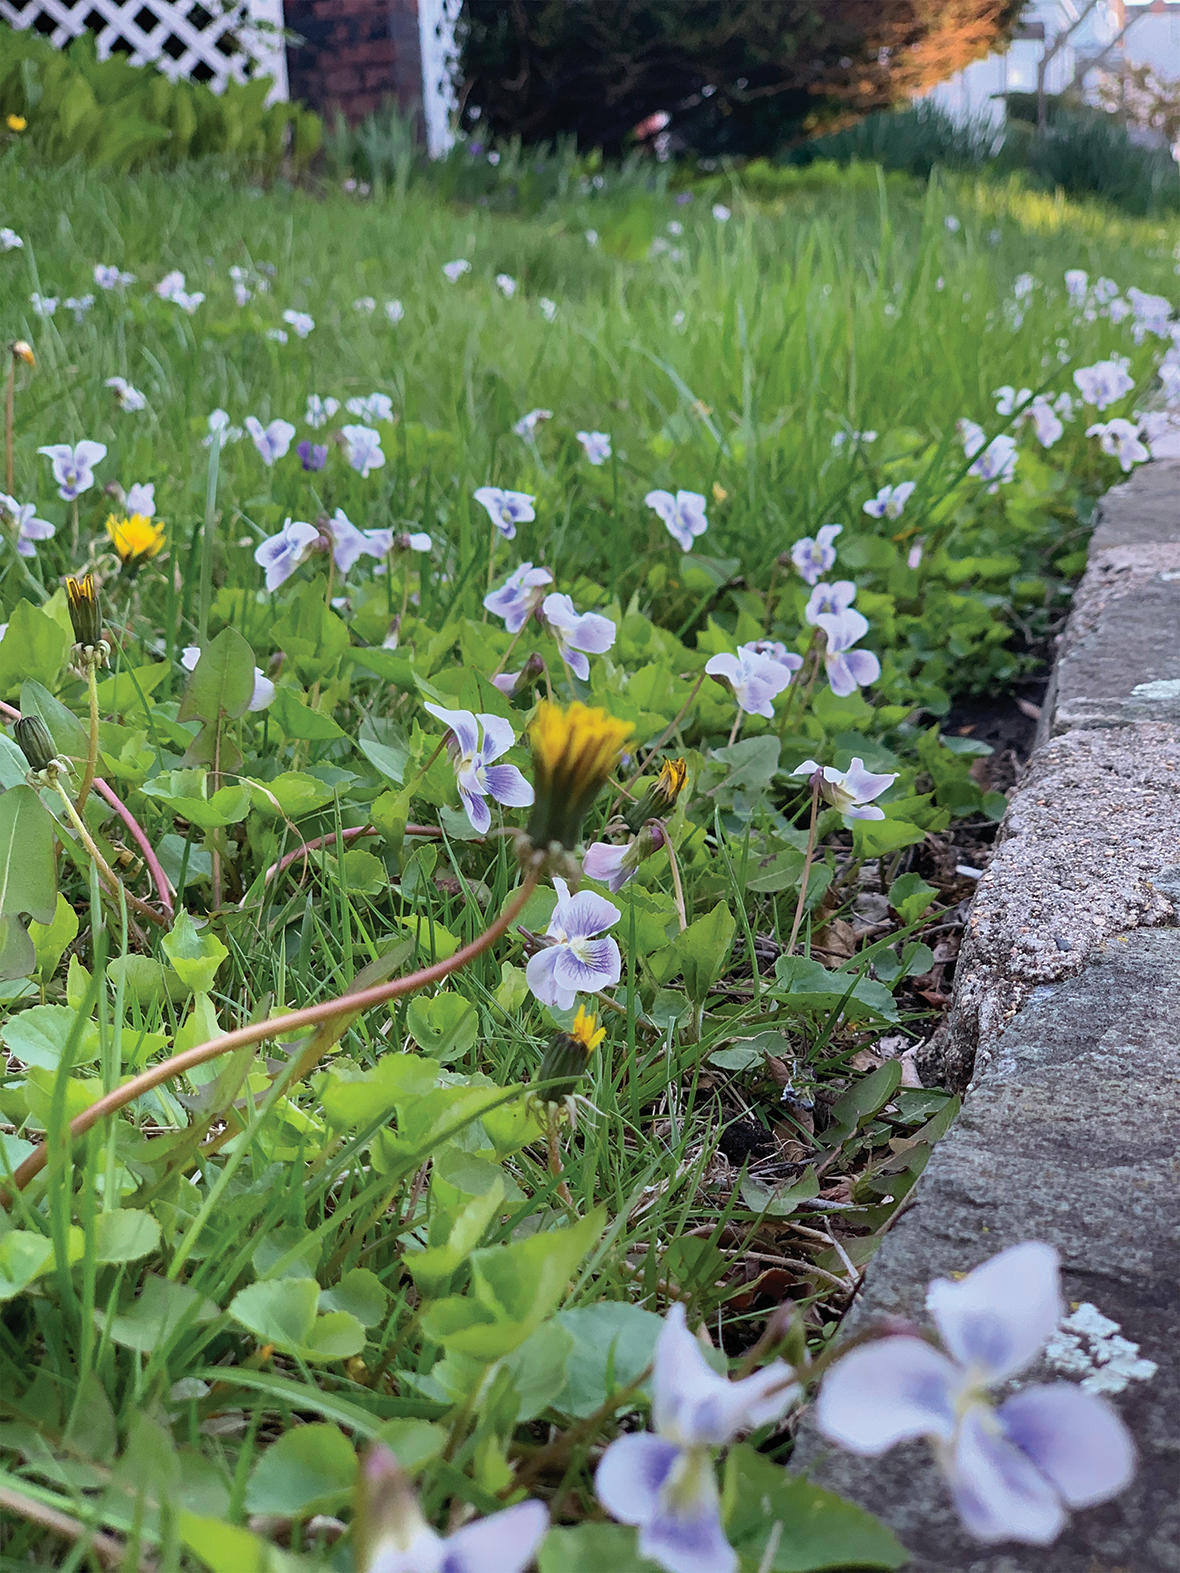 Lawn with violets